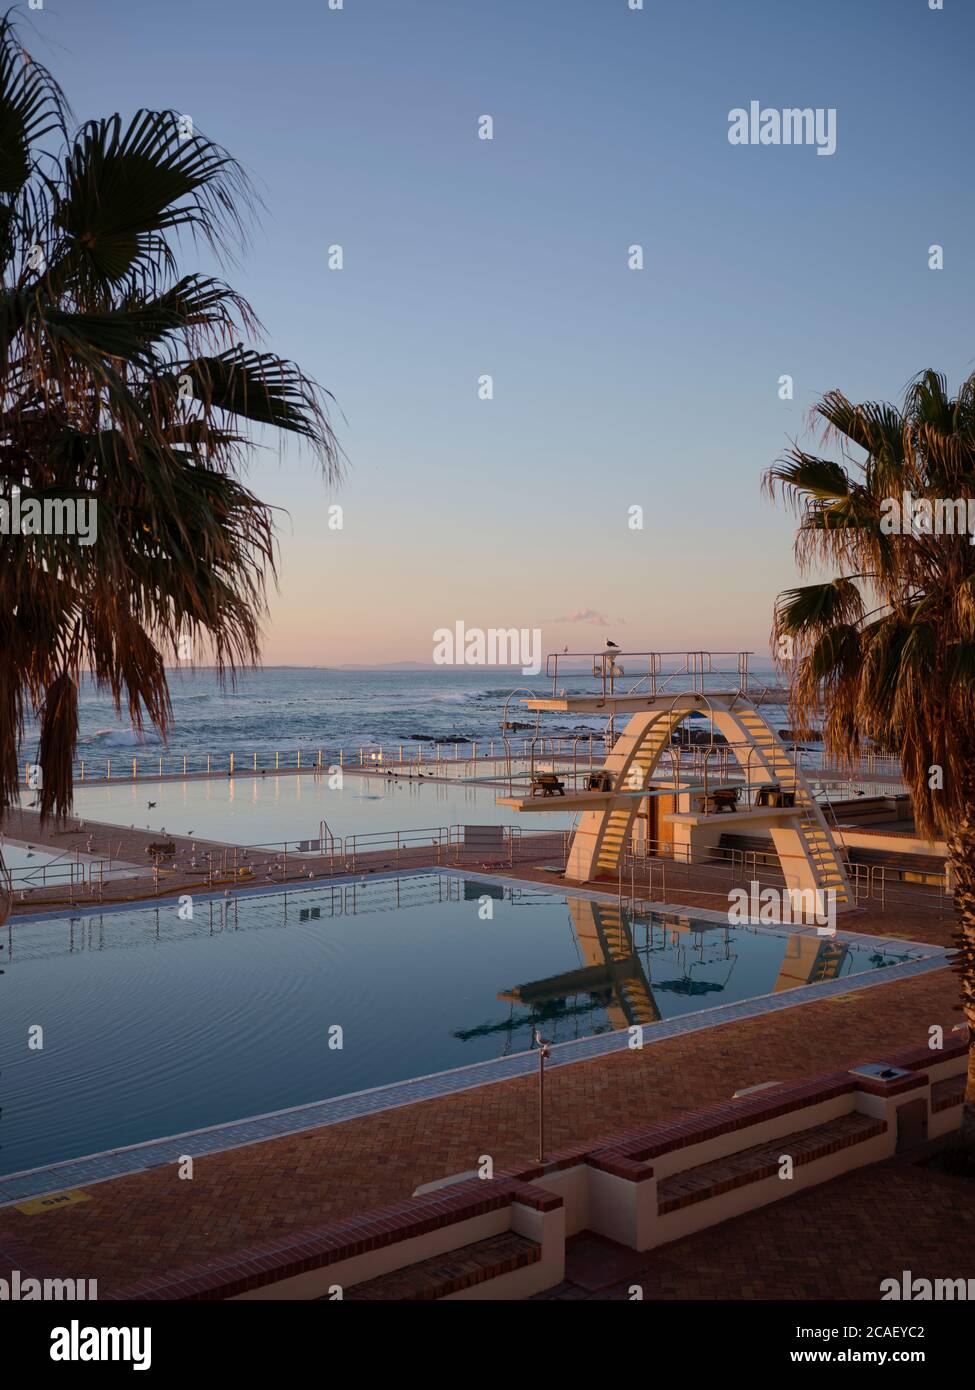 Elevated view of the public swimming pool at Sea Point in Cape Town. This photo was taken during the Covid-19 outbreak in 2020 and under lockdown. Stock Photo